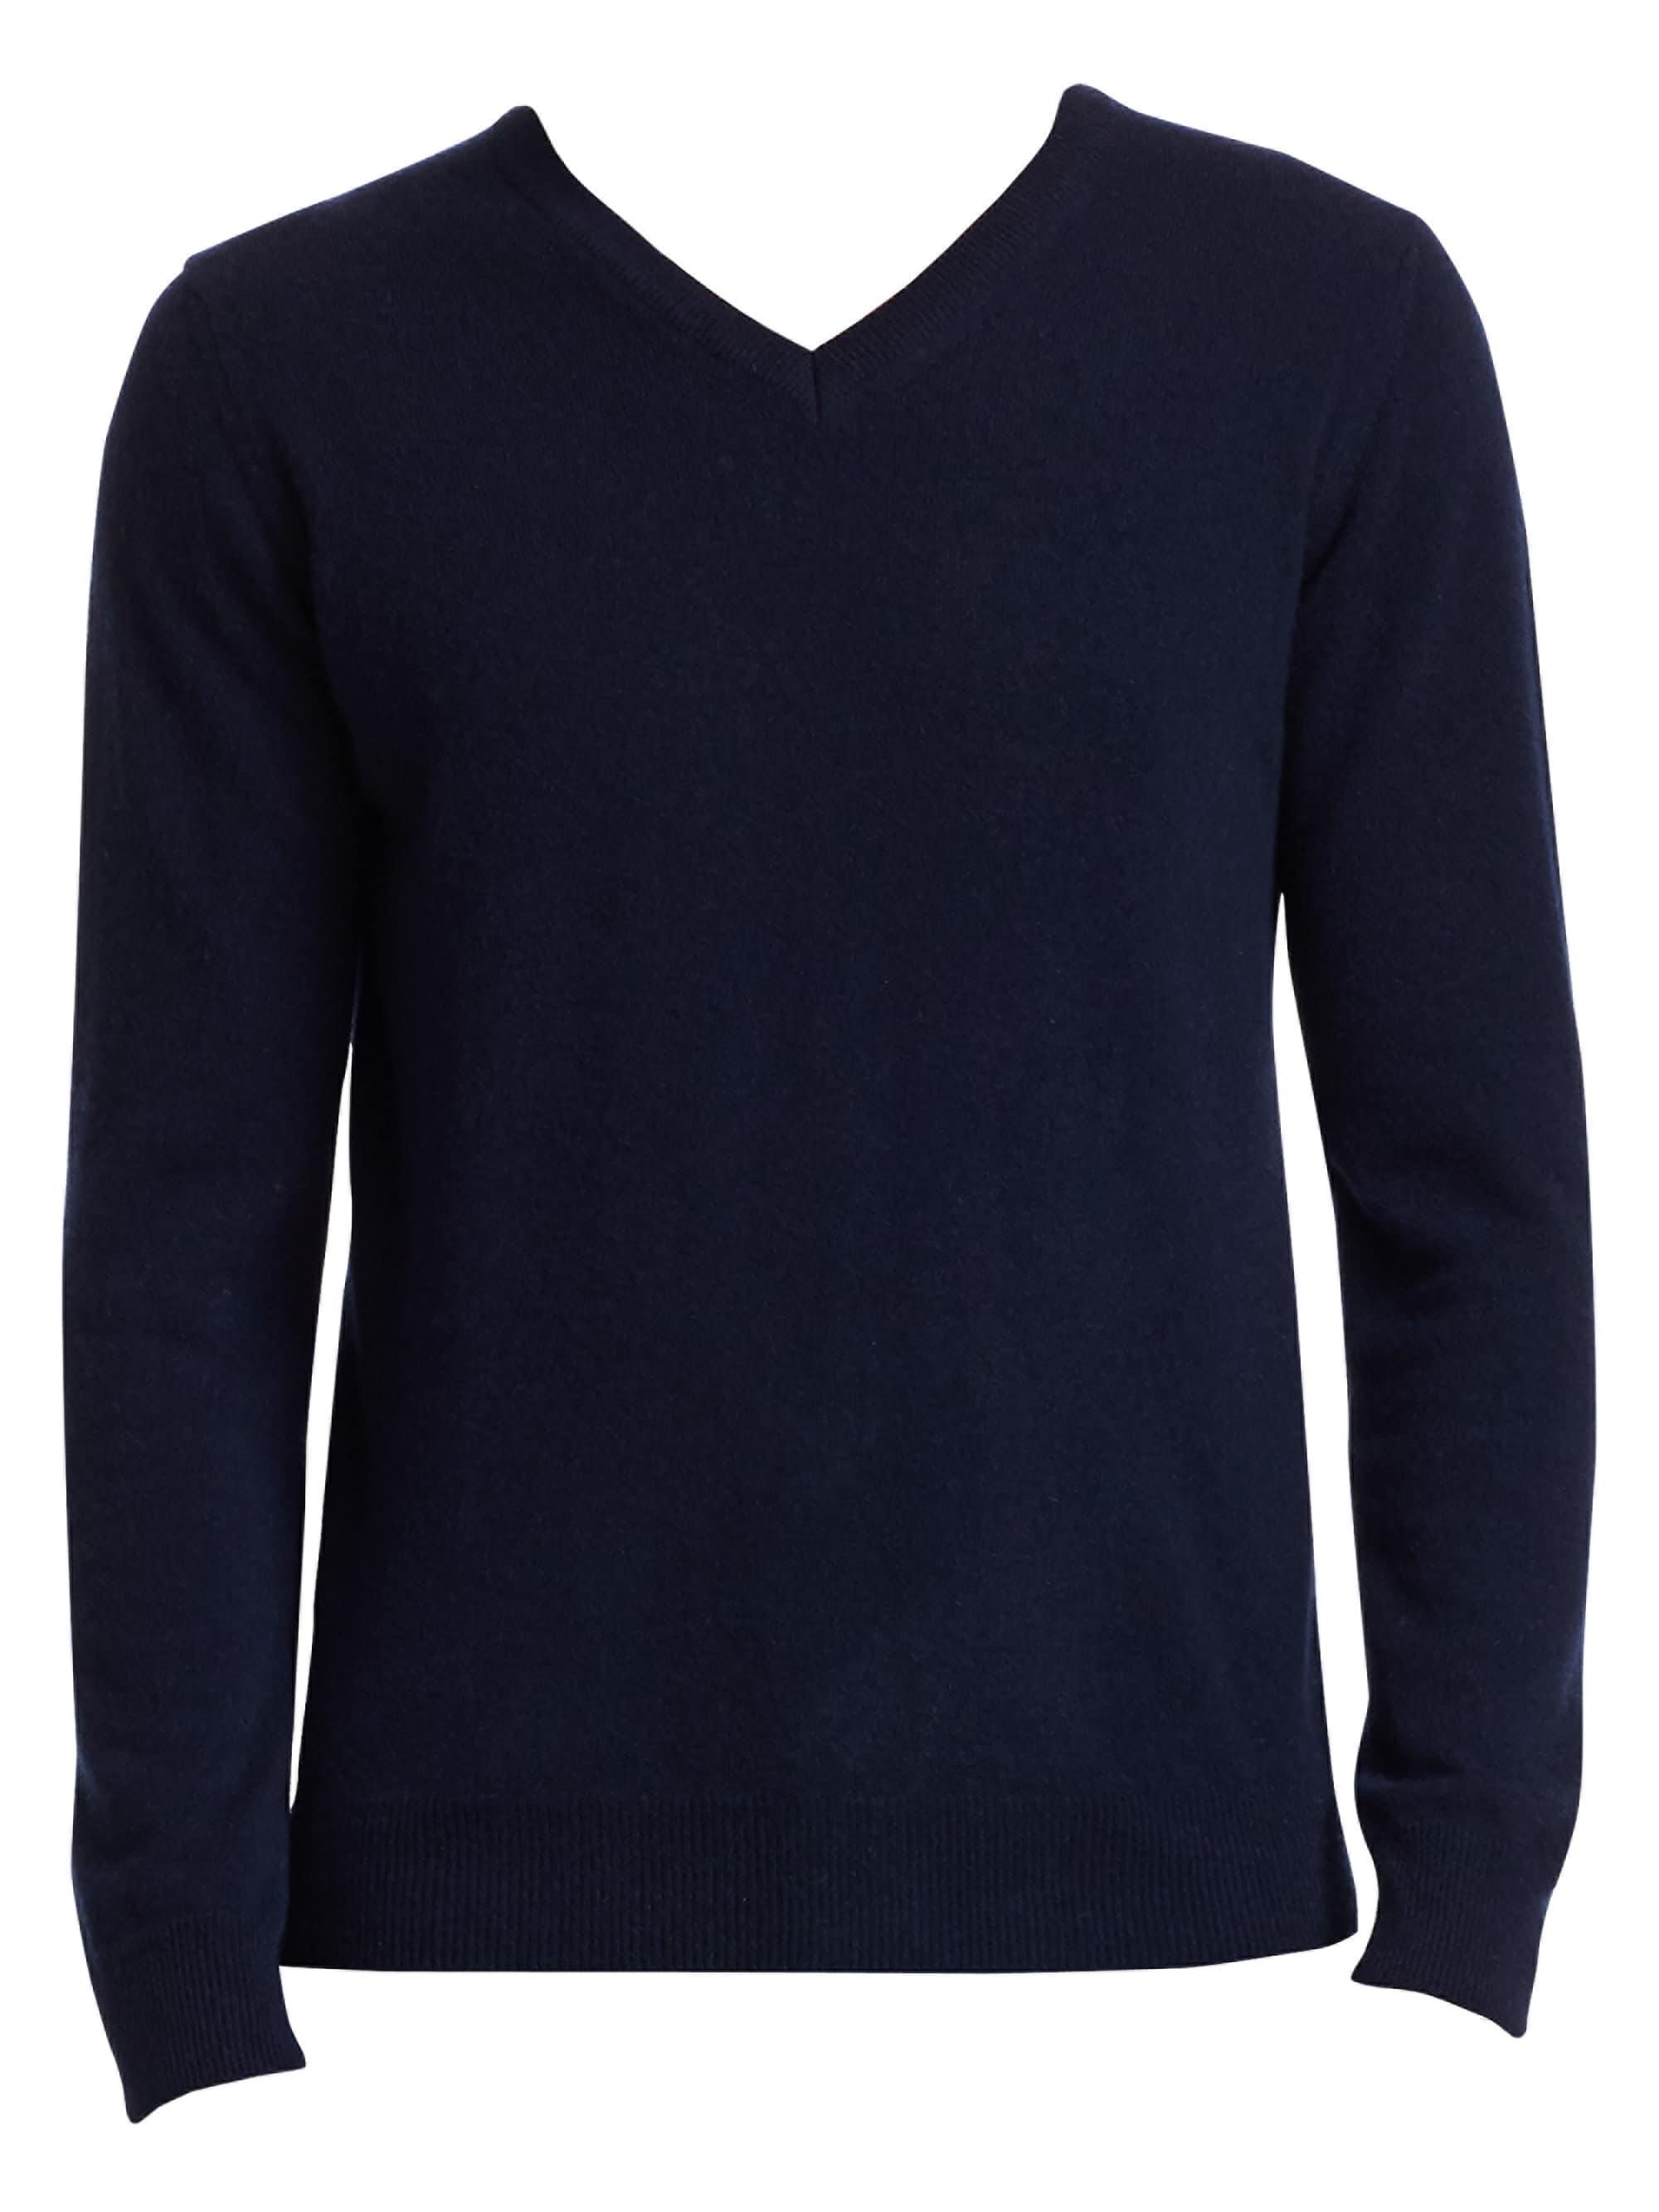 Saks Fifth Avenue Collection V-neck Cashmere Sweater in Blue for Men - Lyst